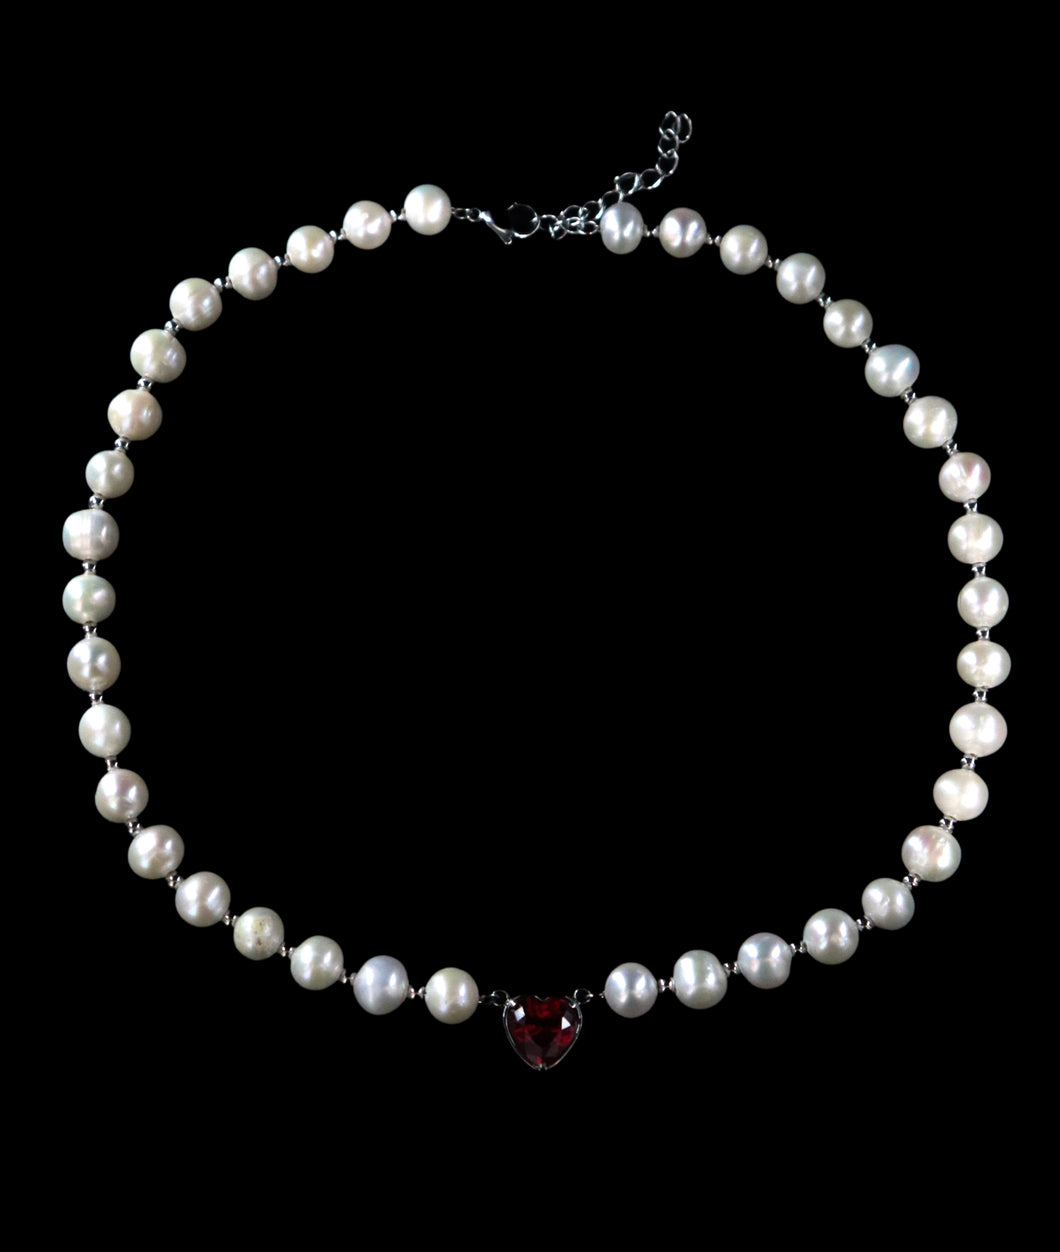 Stone of Love Pearl Necklace - Fashion Jewelry by Yordy.